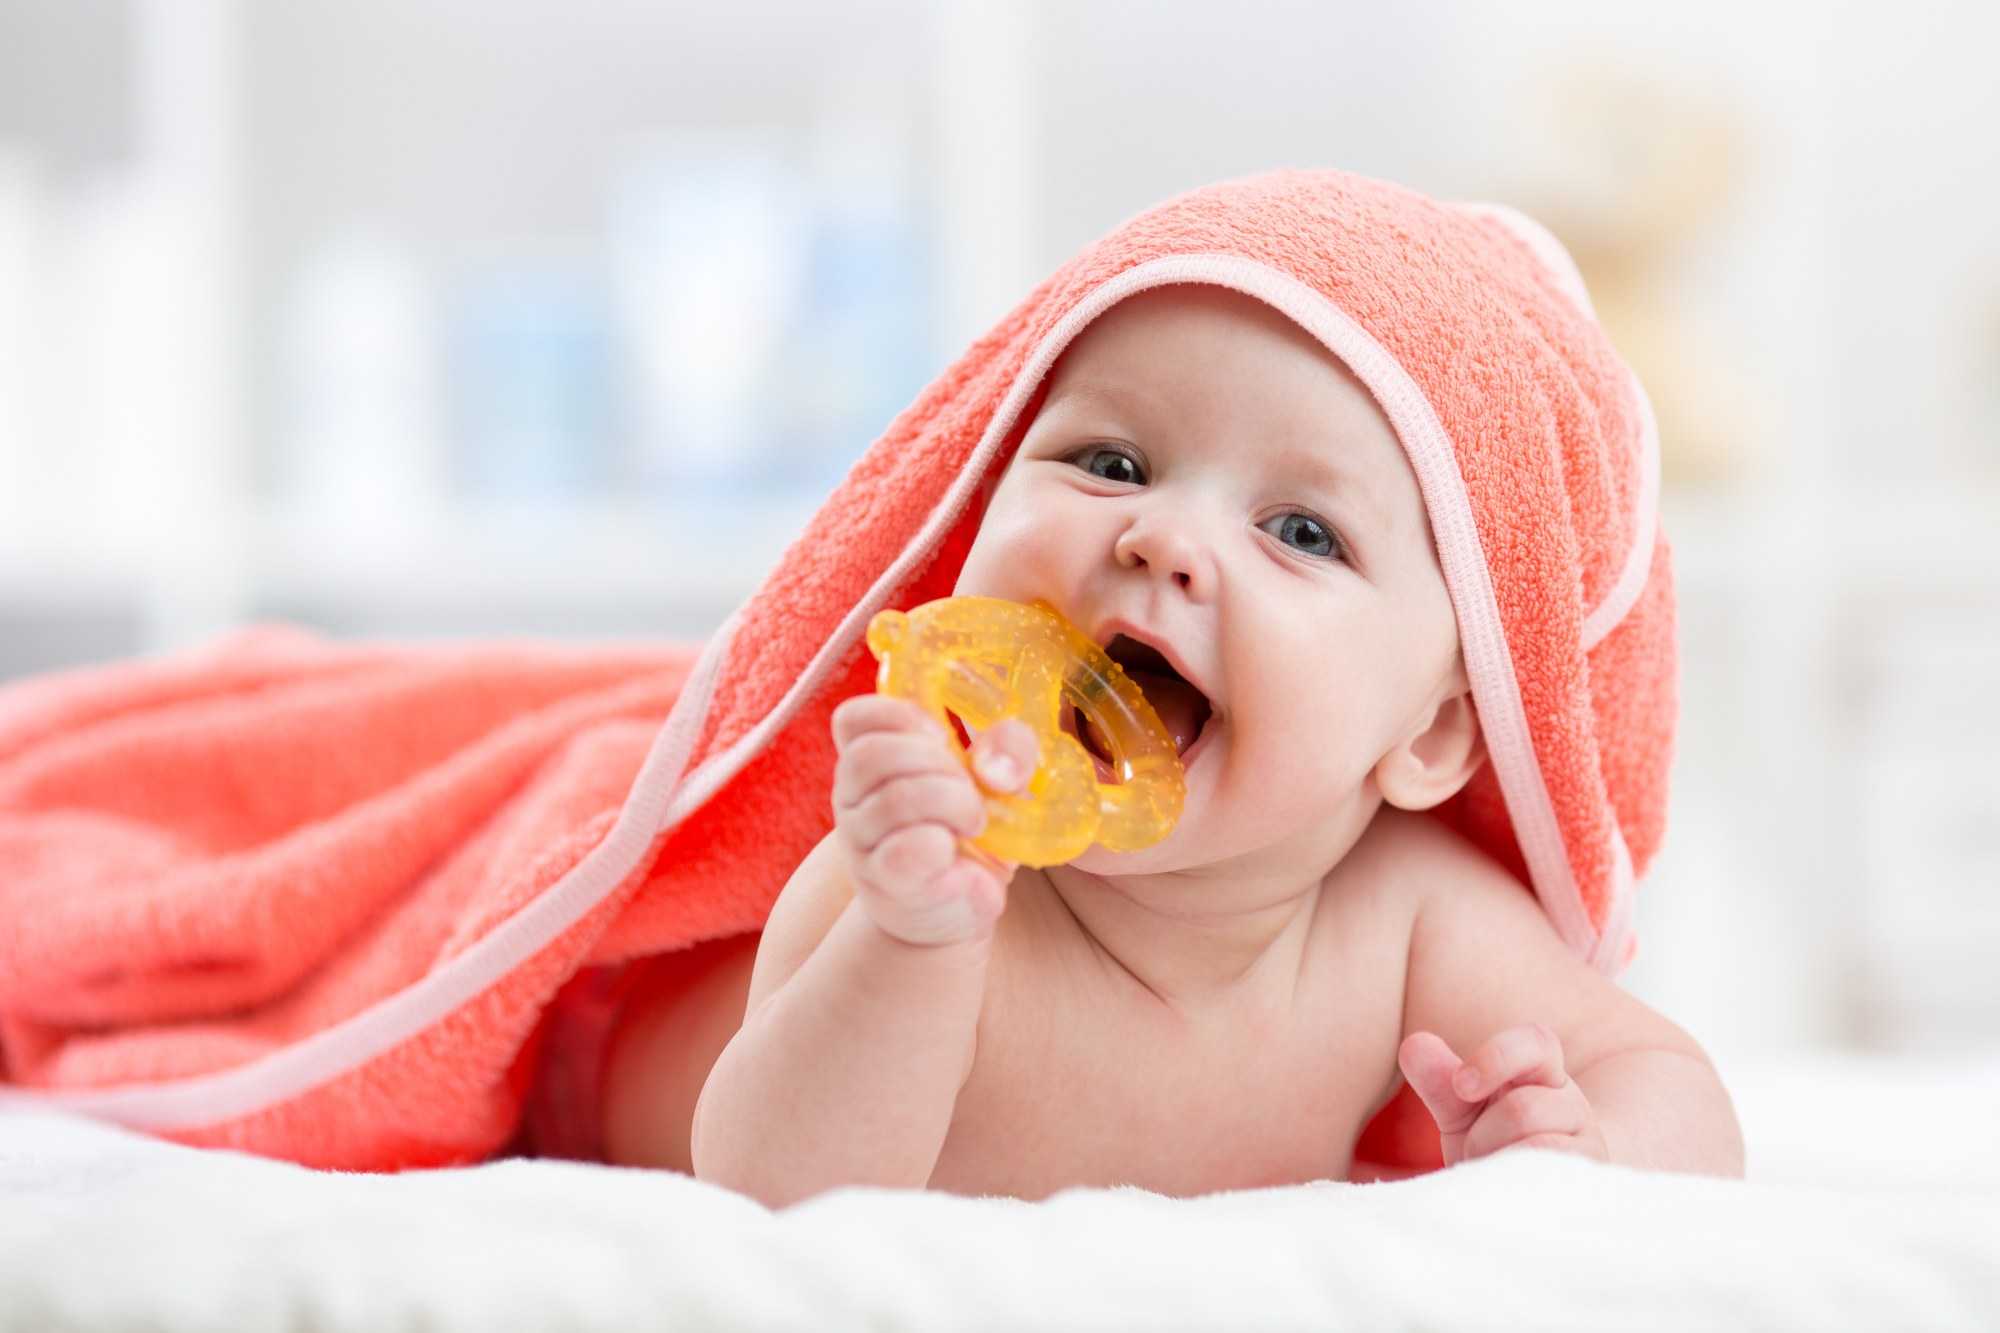 Baby in towel with teething ring